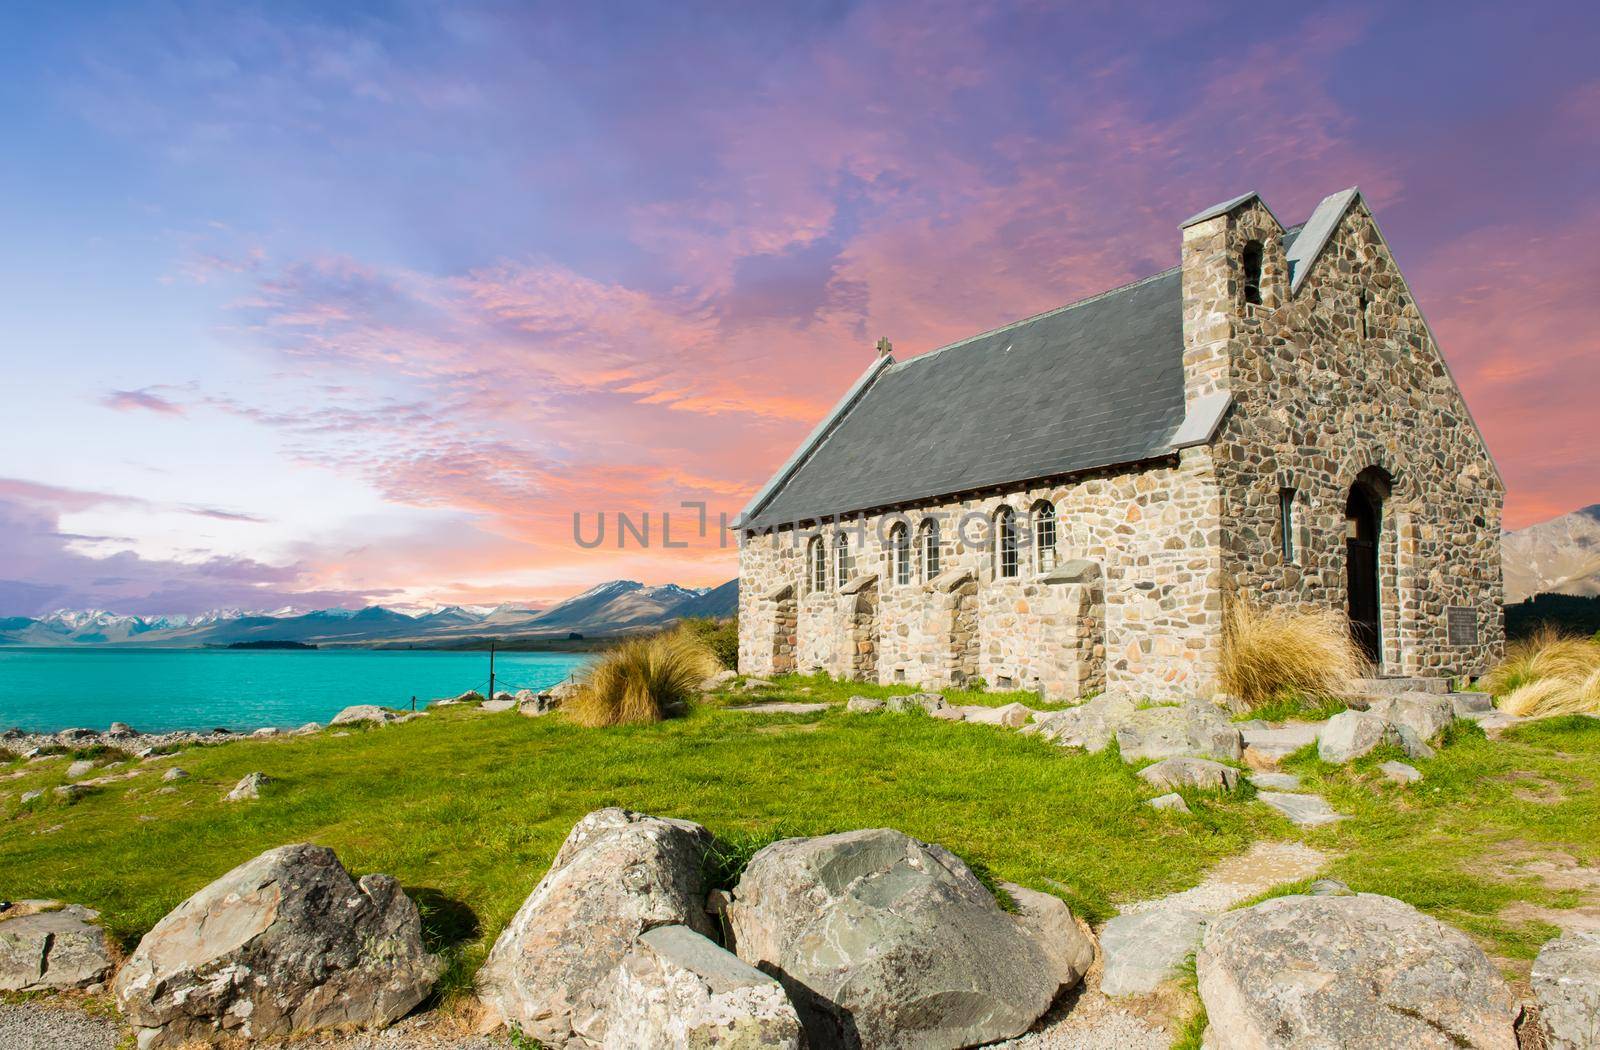 Church of the Good Shepherd in the New Zealand by fyletto